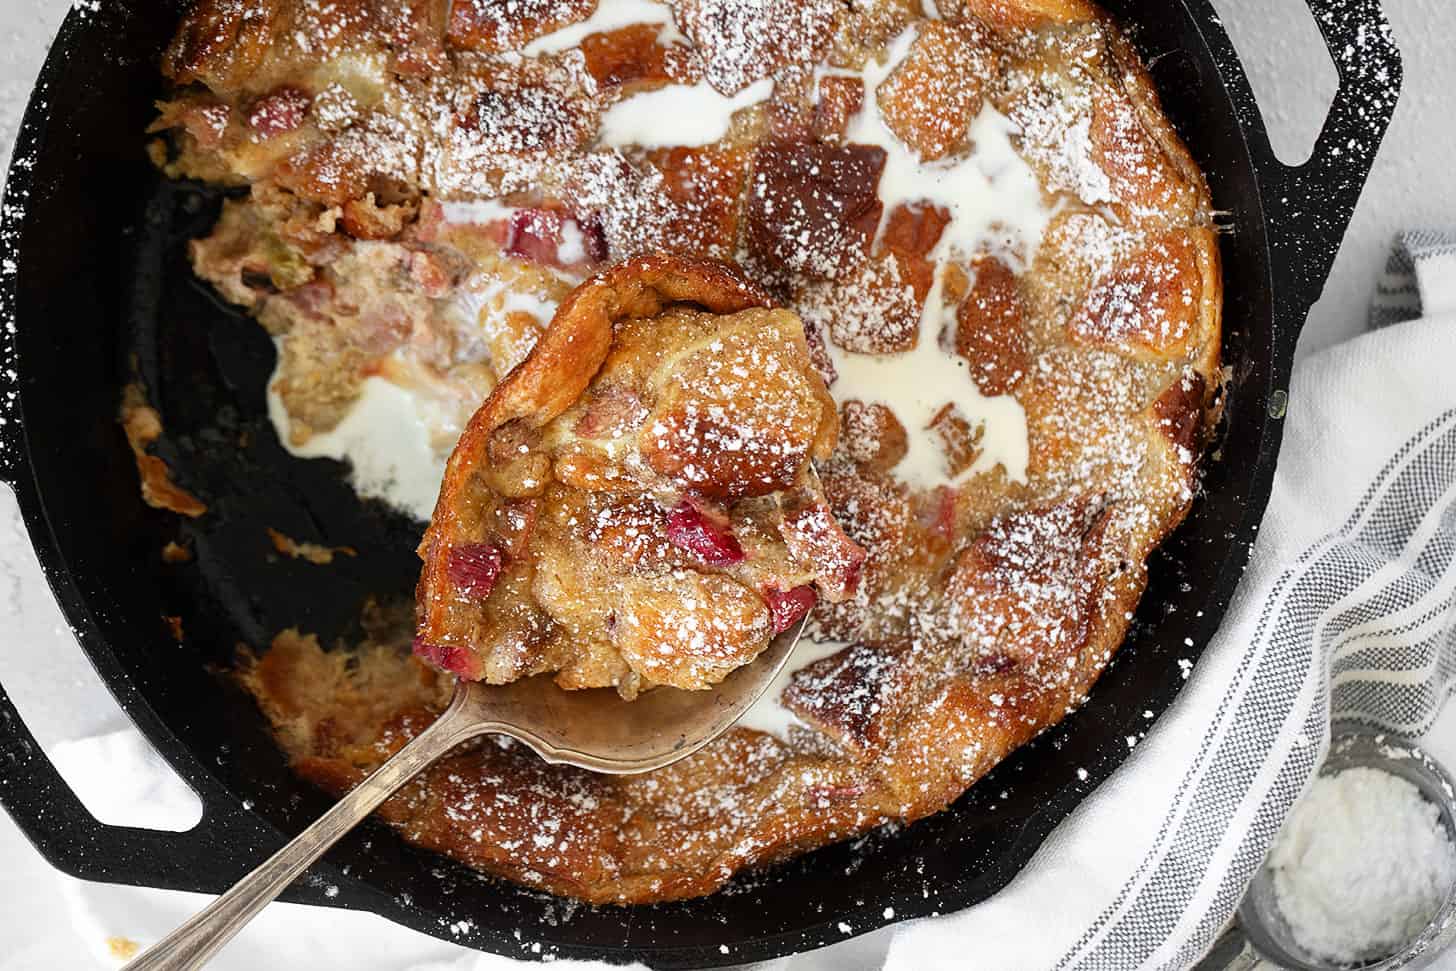 Rhubarb bread pudding in a cast iron skillet with a spoon.